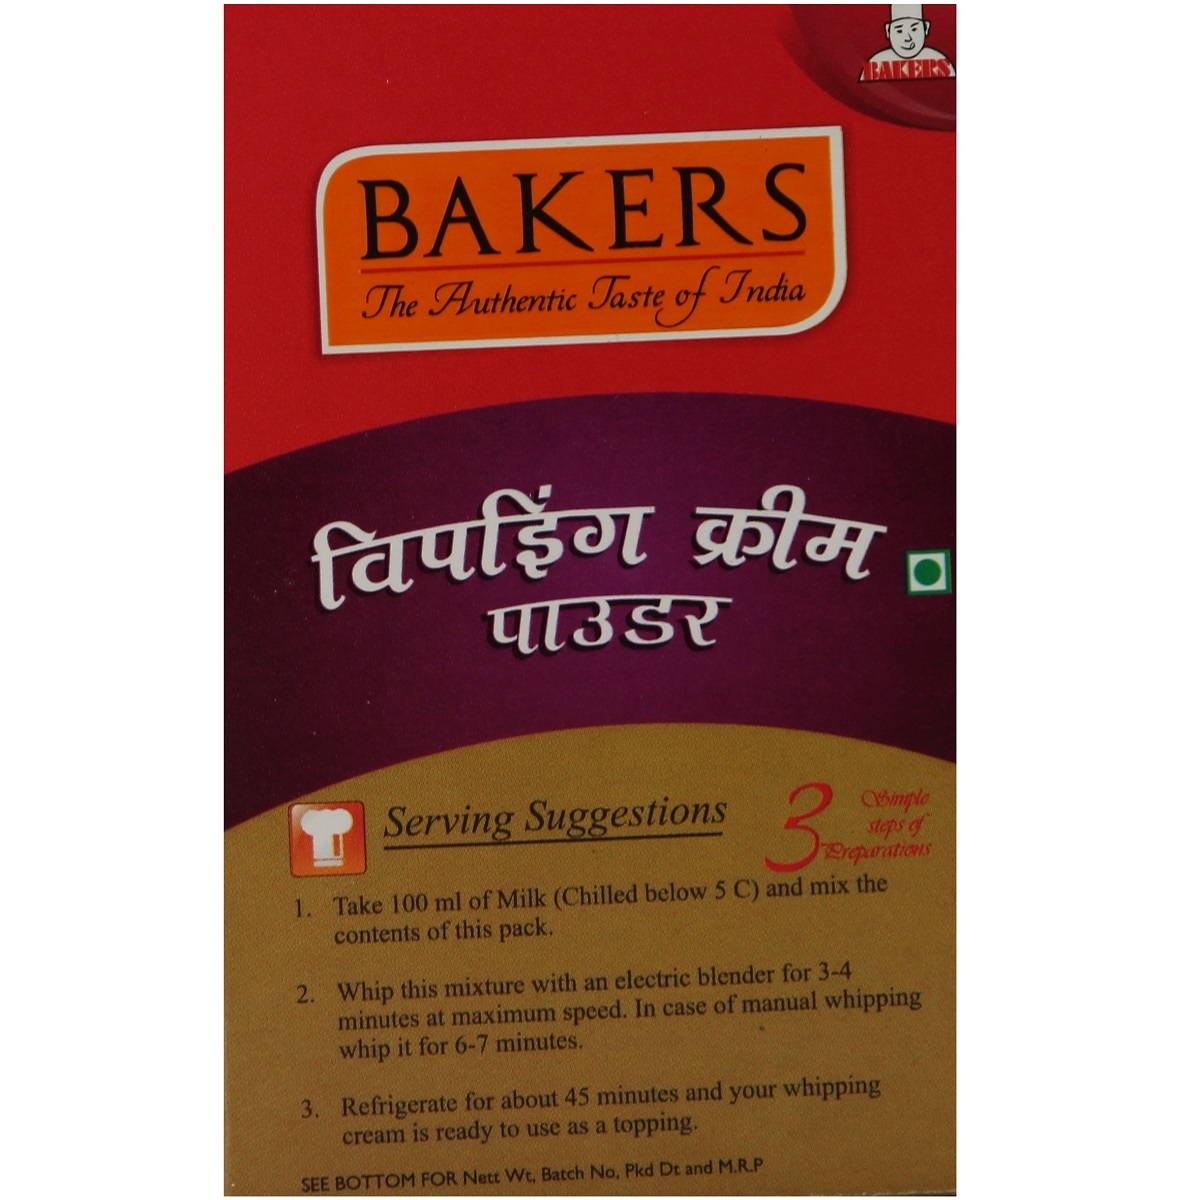 Bakers Whipping Cream Powder 50g